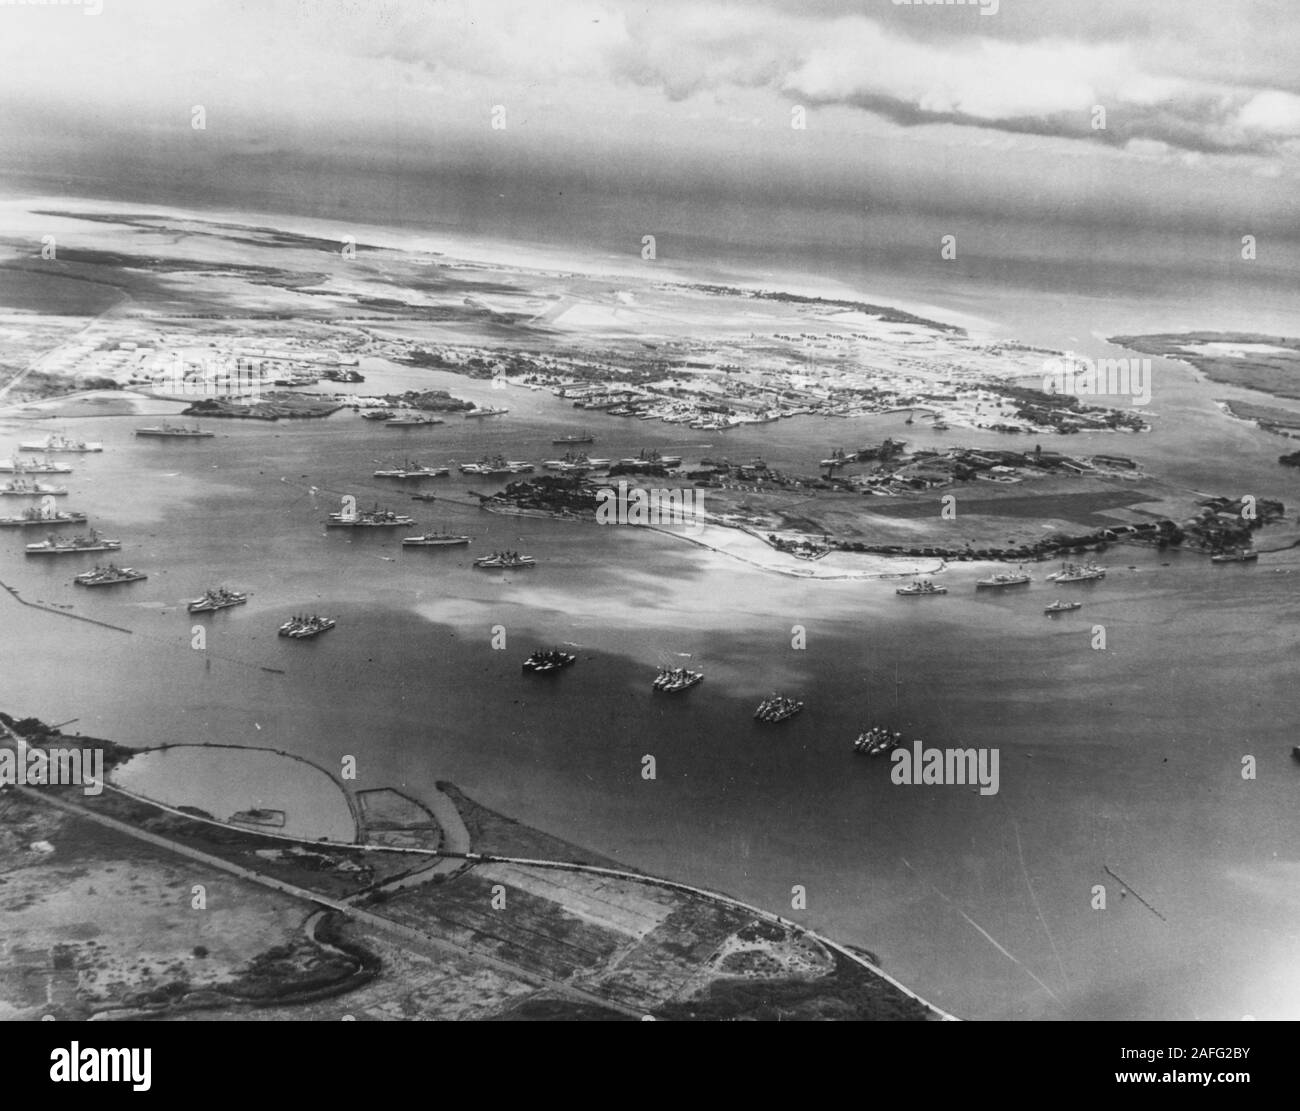 Pearl Harbor - Aerial photograph from 2500 feet altitude, looking southward, showing the U.S. Fleet moored in the harbor on 3 May 1940. This was soon after the conclusion of Fleet Problem XXI and four days before word was received that the Fleet was to be retained in Hawaiian waters. There are eight battleships and the carrier Yorktown (CV-5) tied up by Ford Island, in the center of the harbor. Two more battleships and many cruisers, destroyers and other Navy ships also present, most of them moored in groups in East Loch, in the foreground. A few of the destroyers are wearing experimental dark Stock Photo